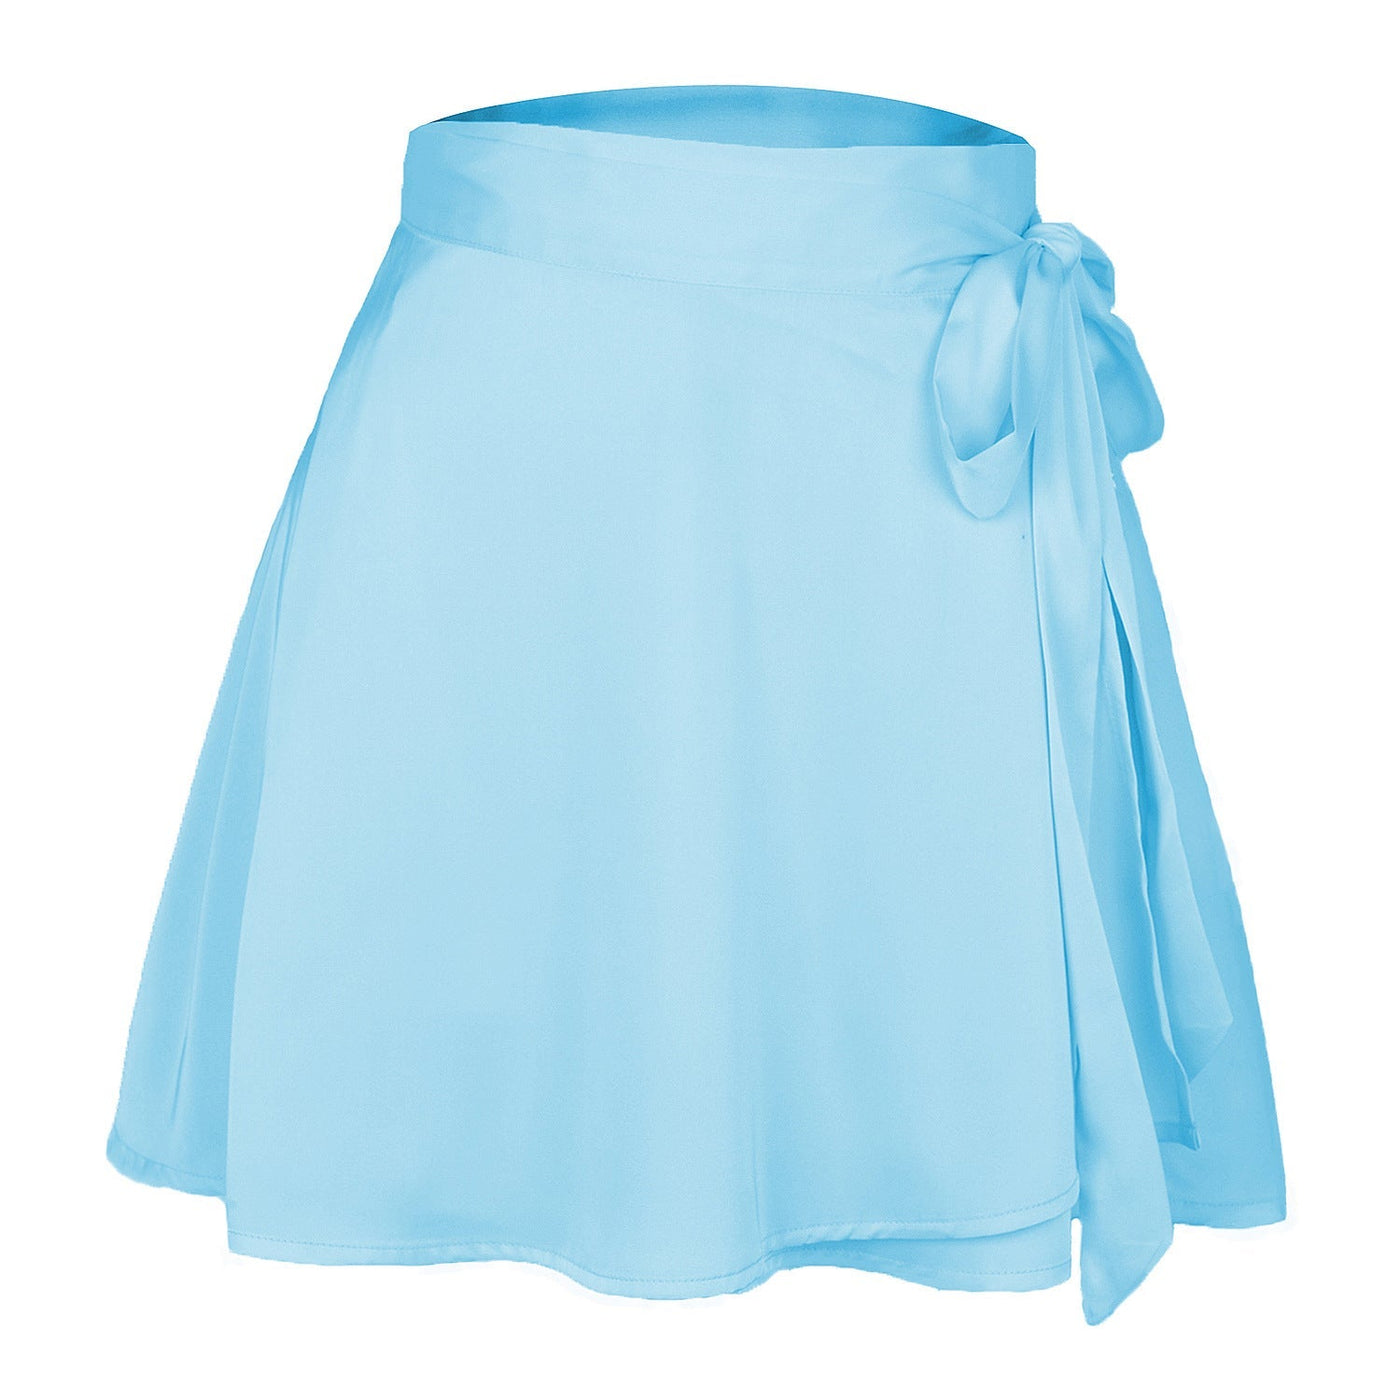 NTG Fad S / Blue High Waist Lace-Up Loose Casual Chiffon Satin Mini Skirt Solid Color Elegant Skirts